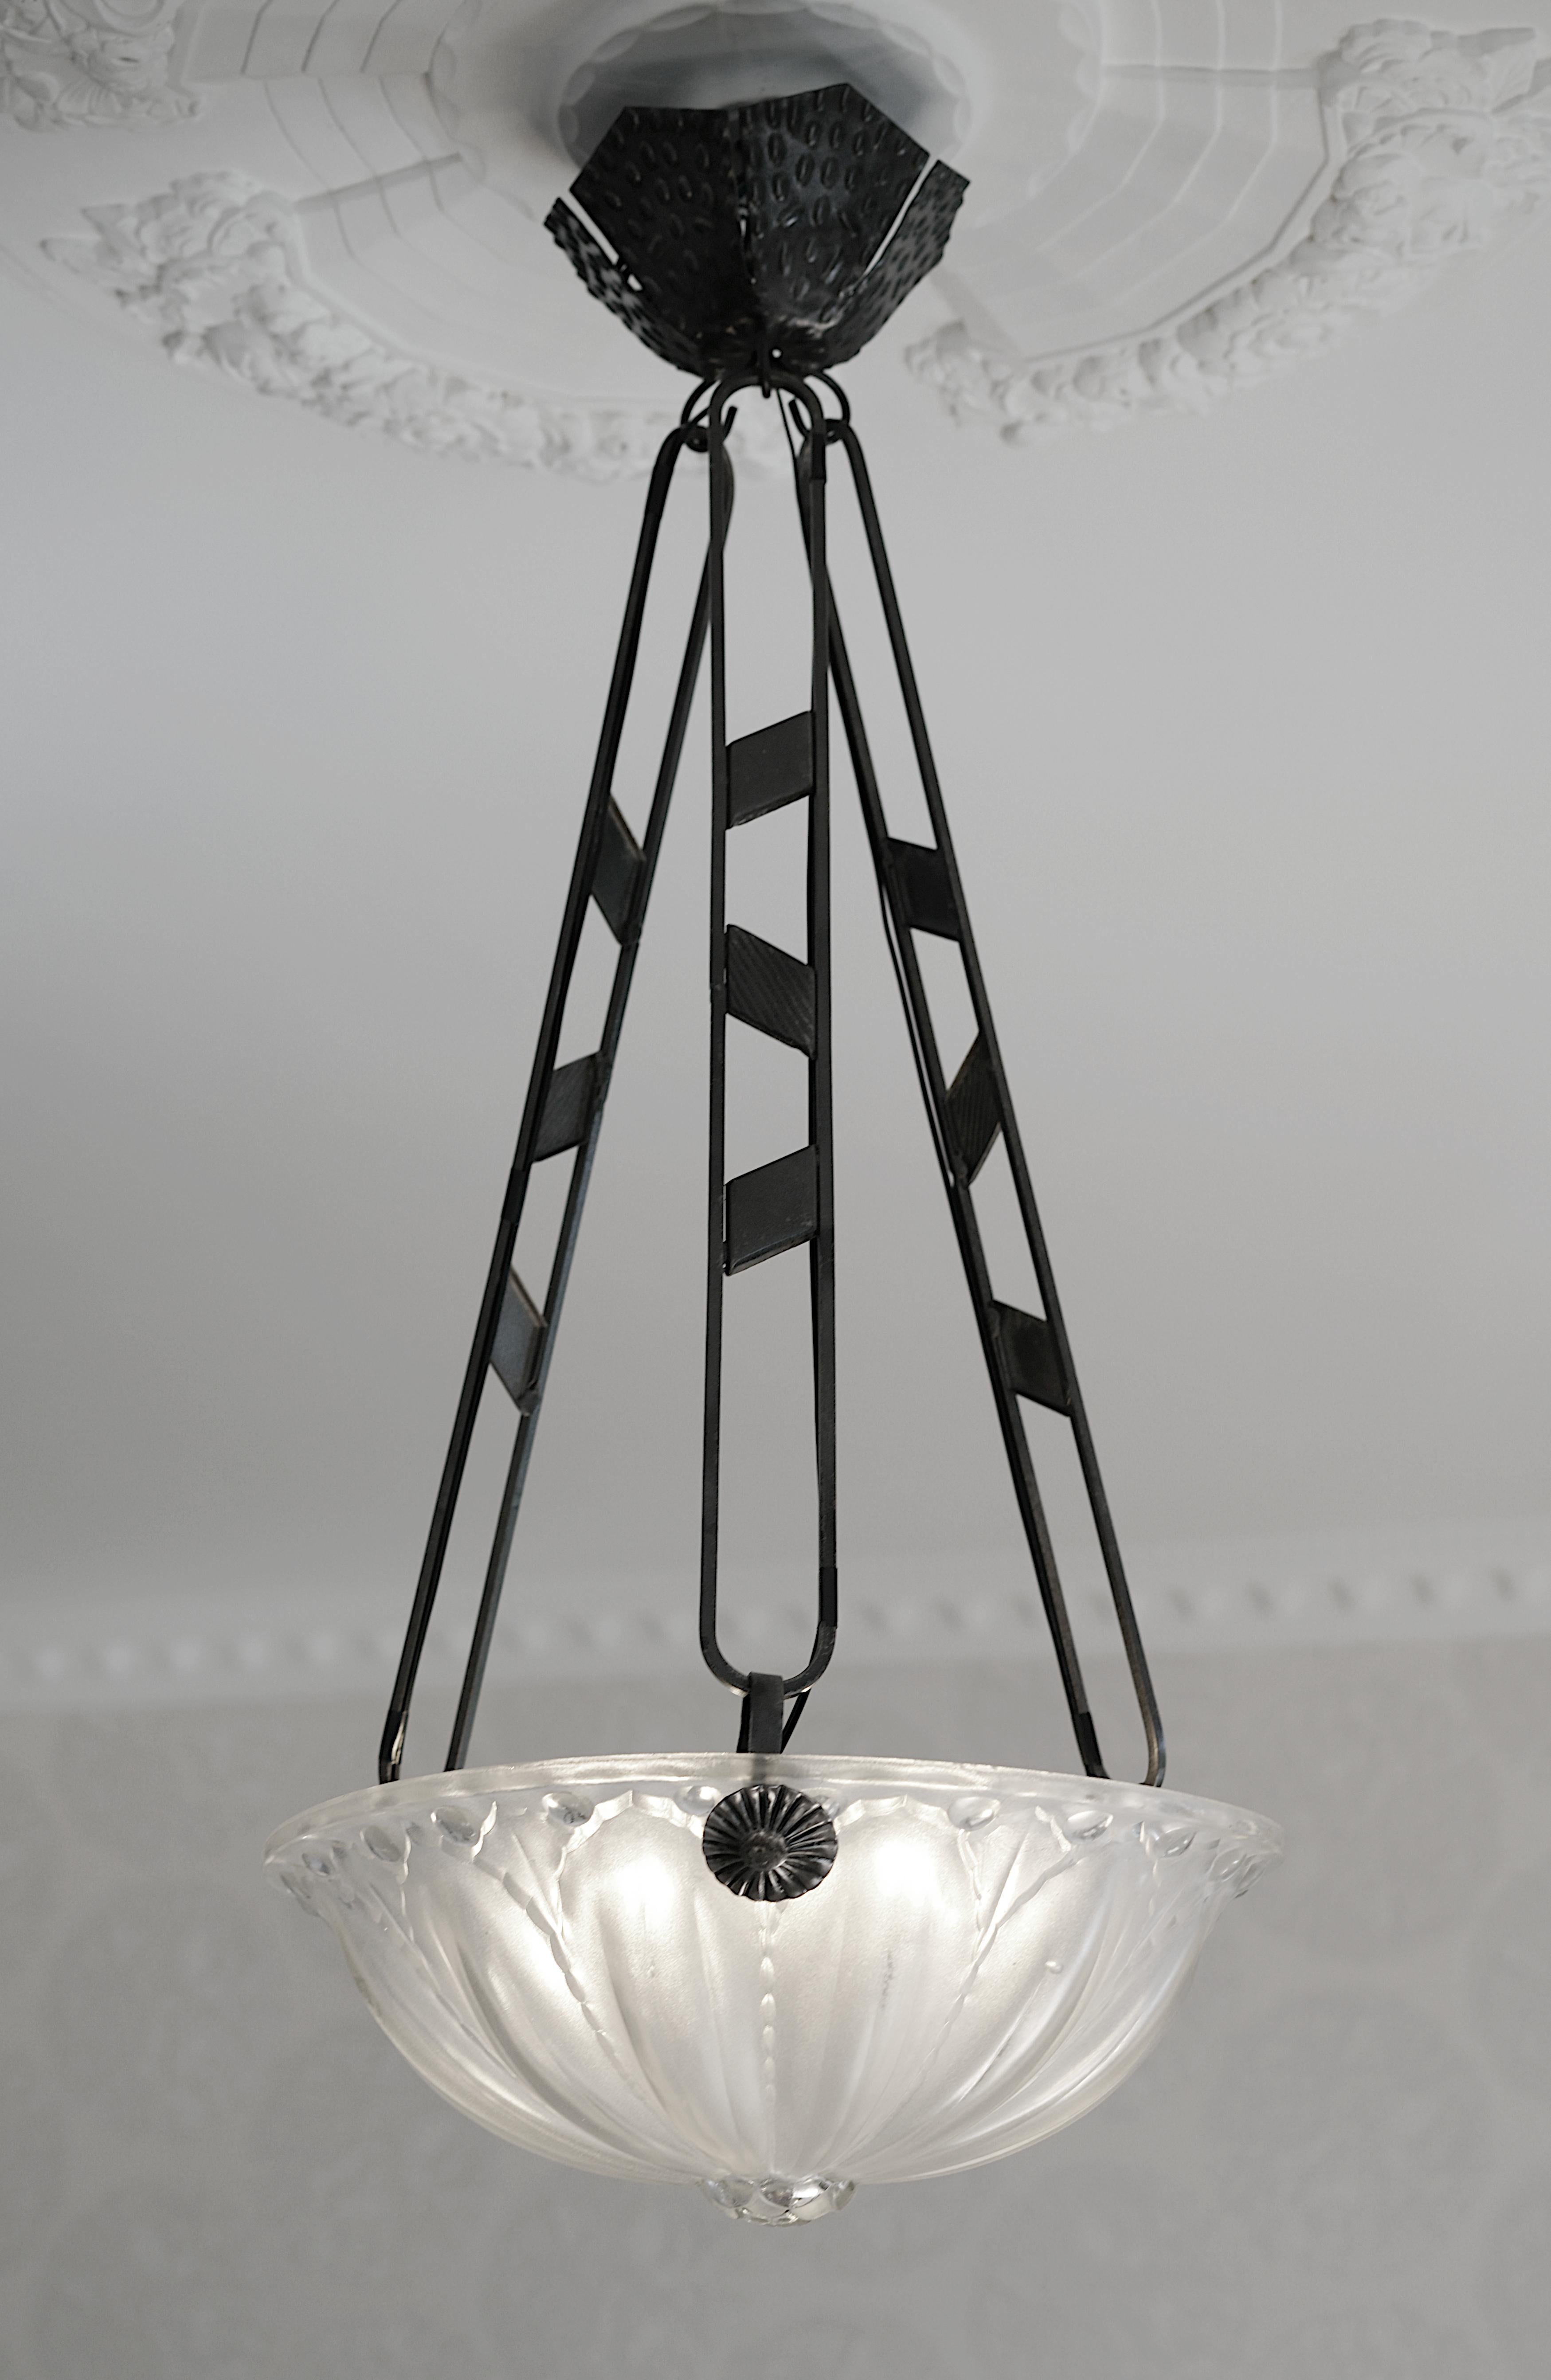 SONOVER French Art Deco Pendant Chandelier, Late 1920s For Sale 5